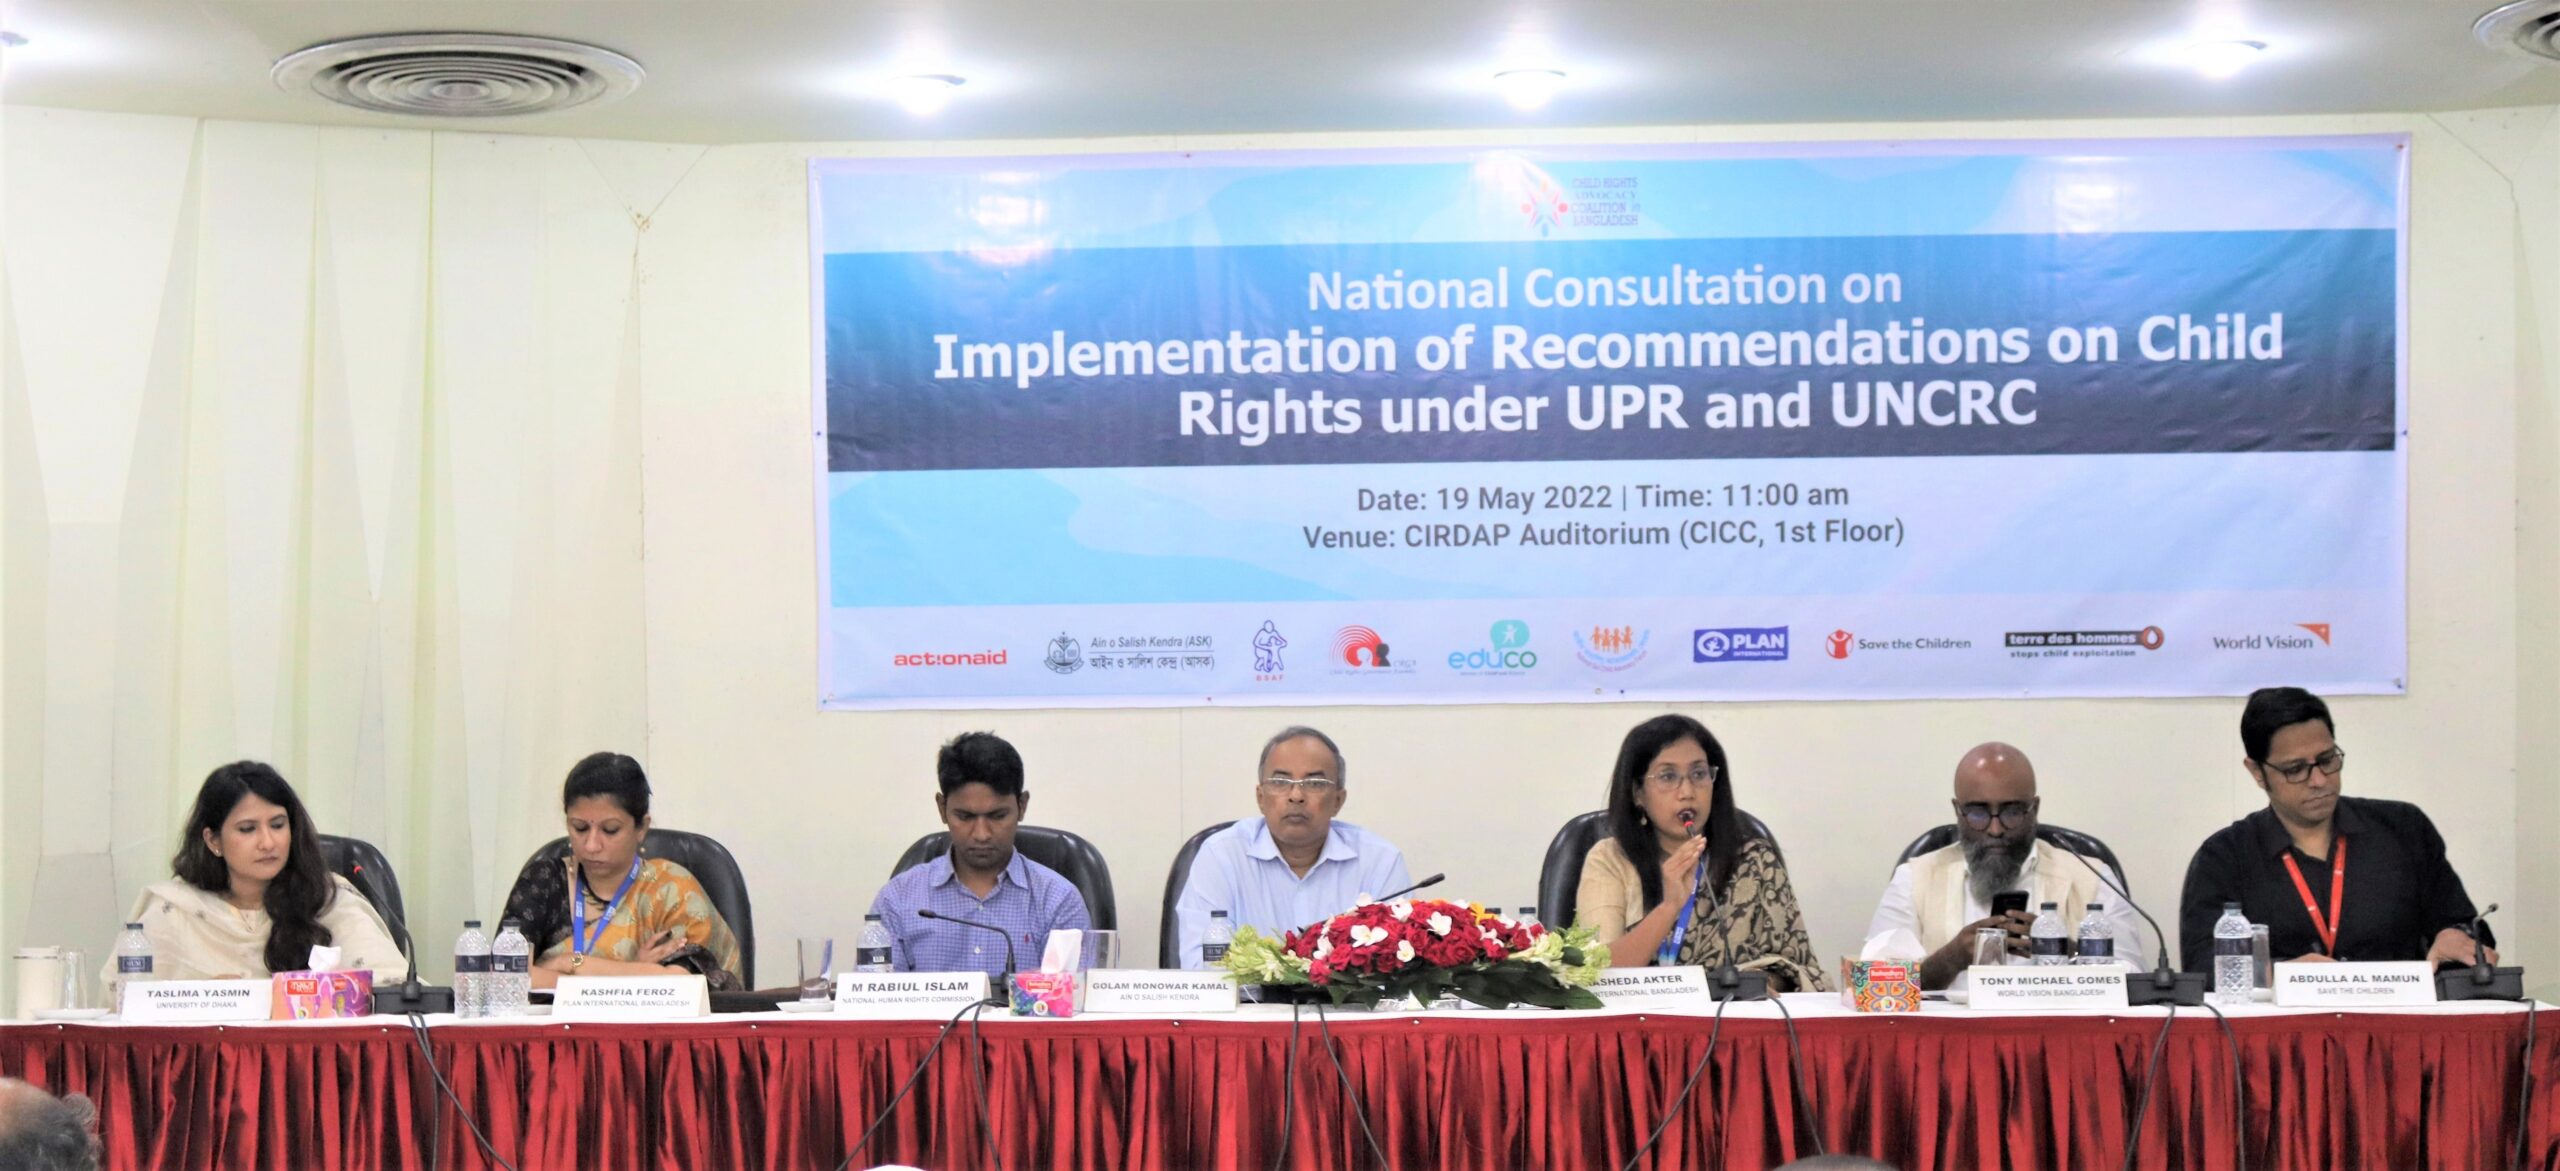 National Consultation on Implementation of Recommendations on Child Rights under UPR and UNCRC